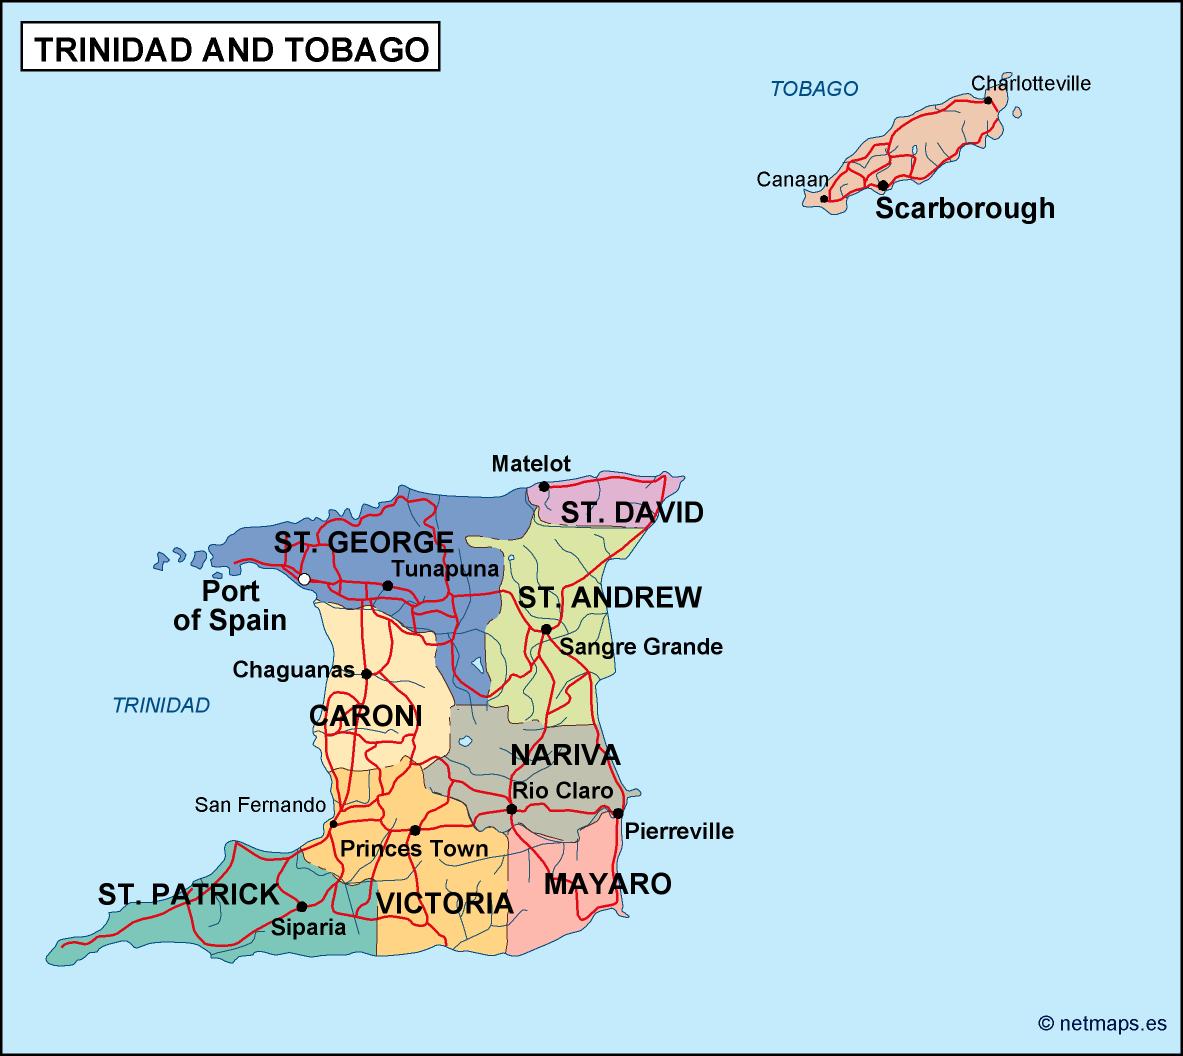 Largest number of new Covid cases in St. George, Caroni and Victoria counties